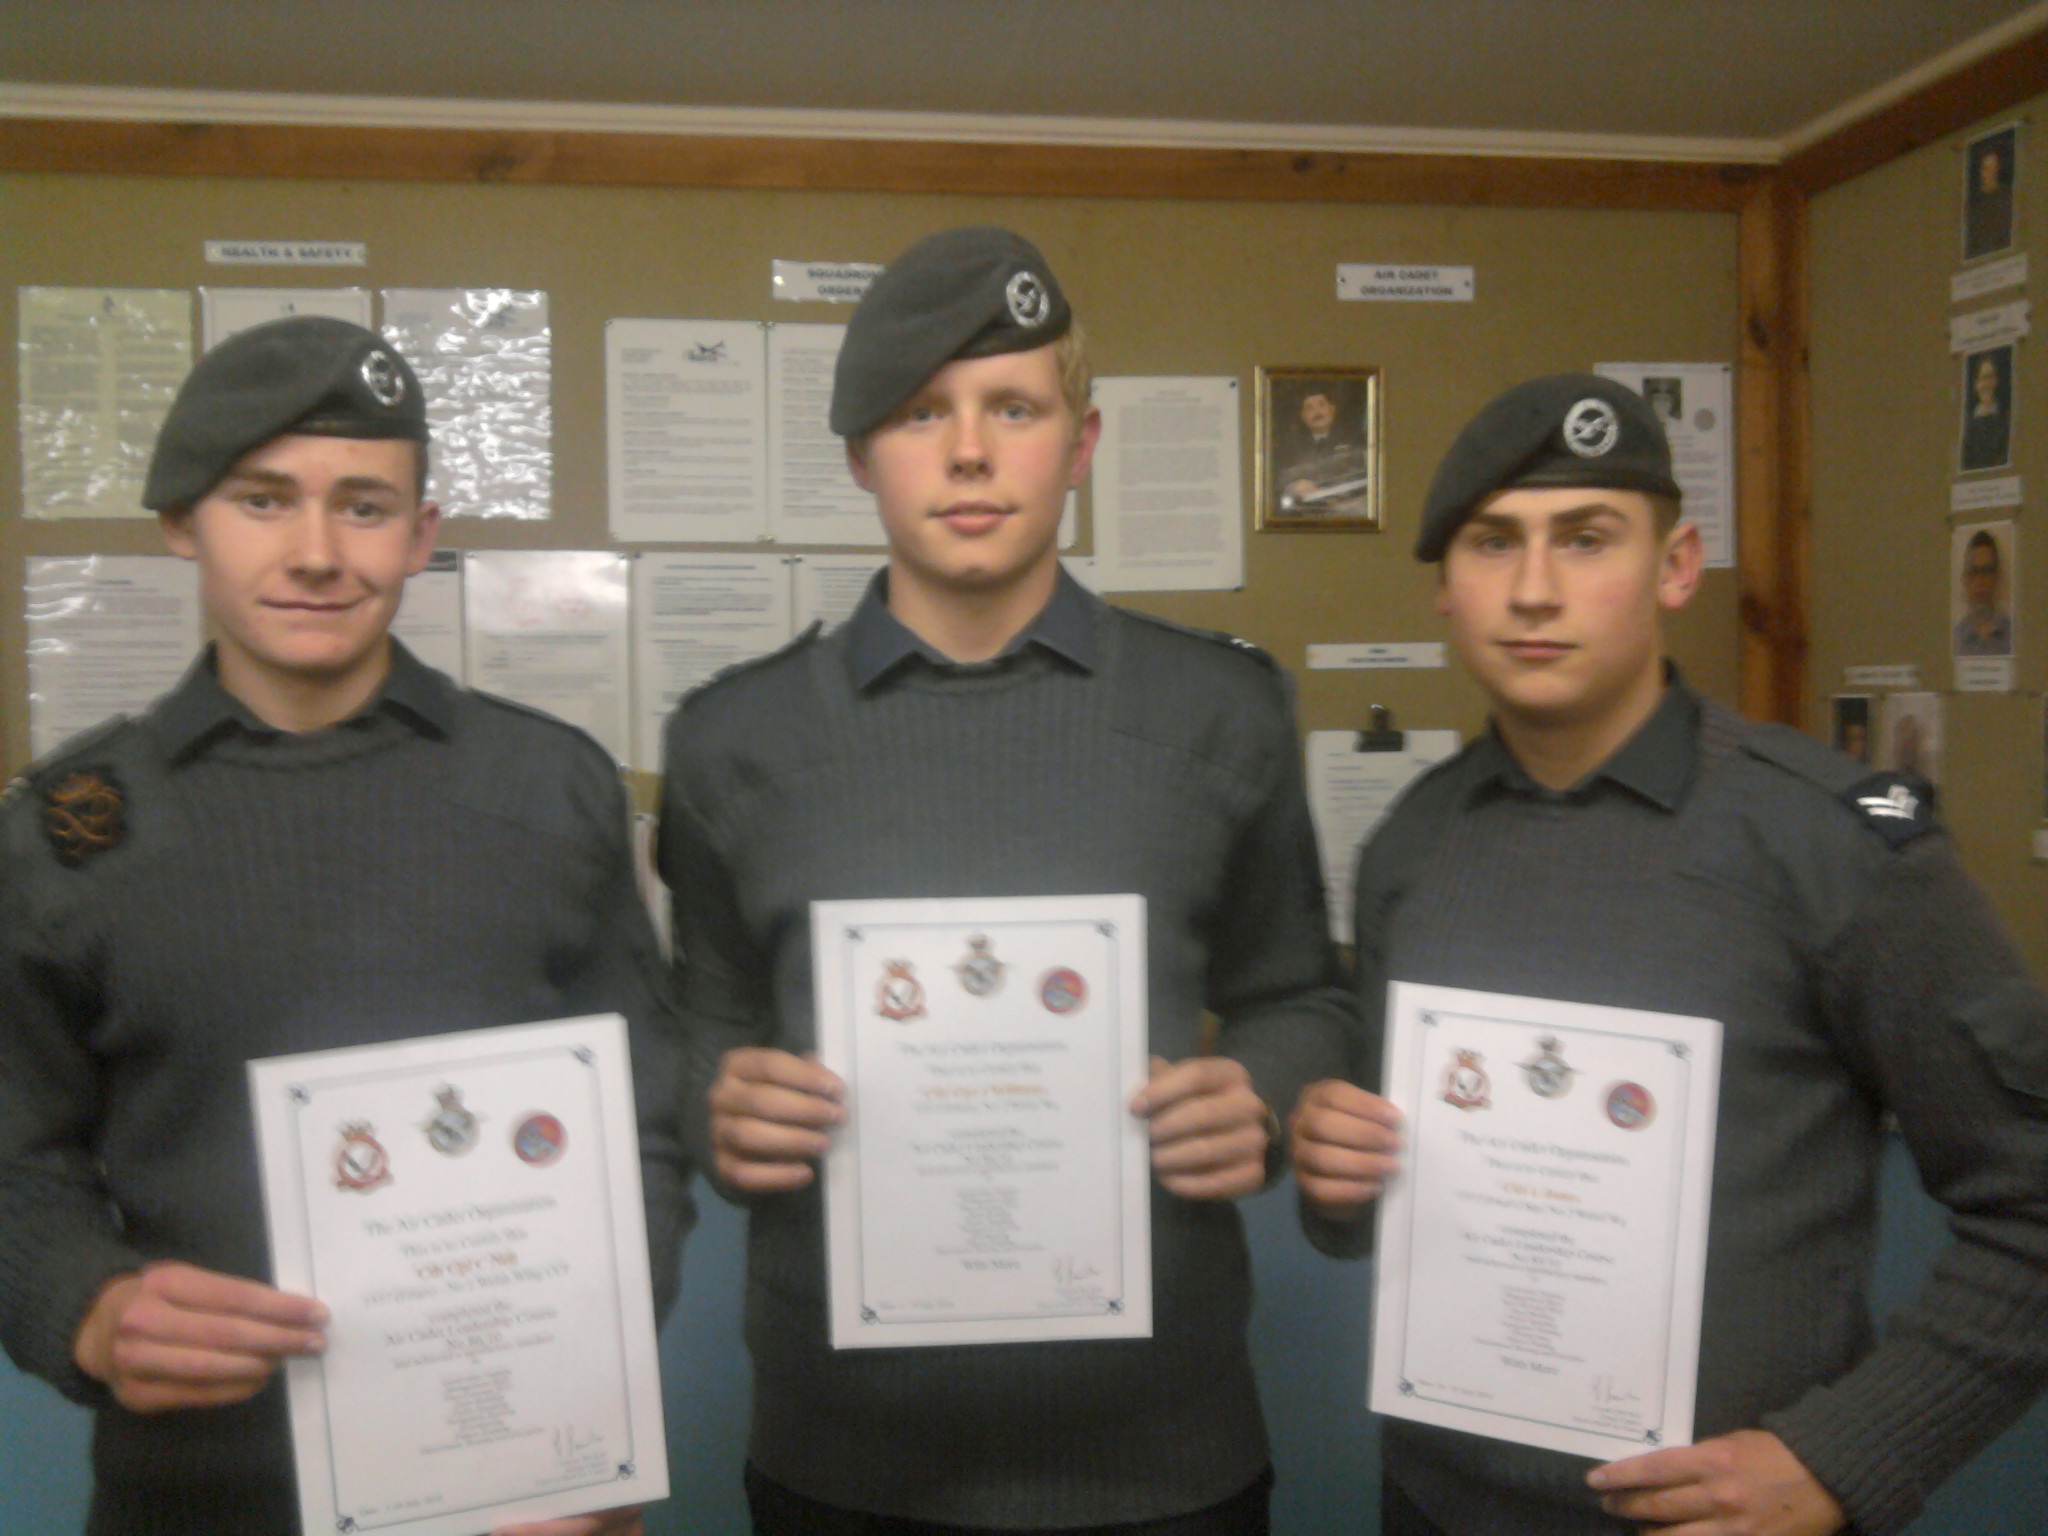 Sgt Craig Neil, Cpl Jacob Williams and Cpl Llyr Jones with their certificates